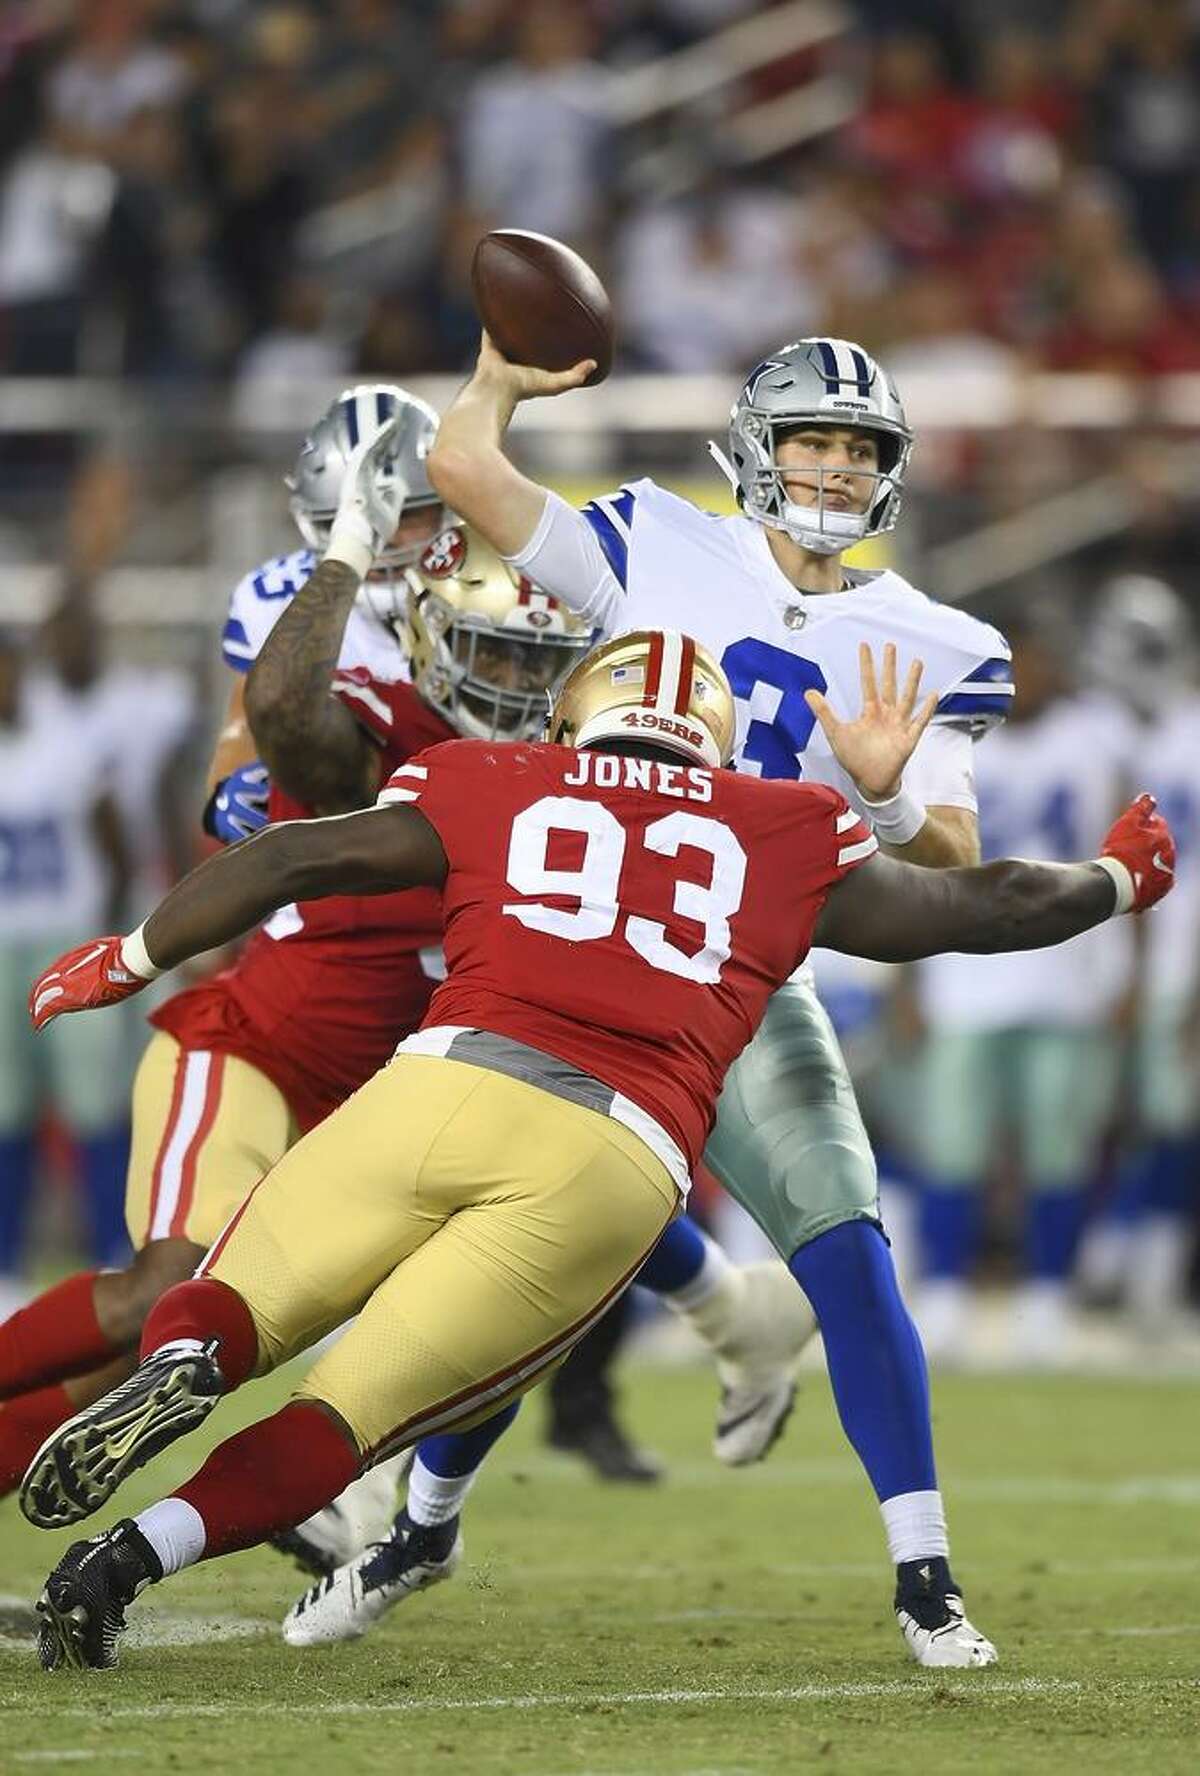 D.J. Jones puts pressure on Cowboys quarterback Mike White in the 49ers’ preseason opener. Jones had three tackles and forced a fumble in last week’s loss at Houston, where he earned the highest grade among 49ers defenders from Pro Football Focus.